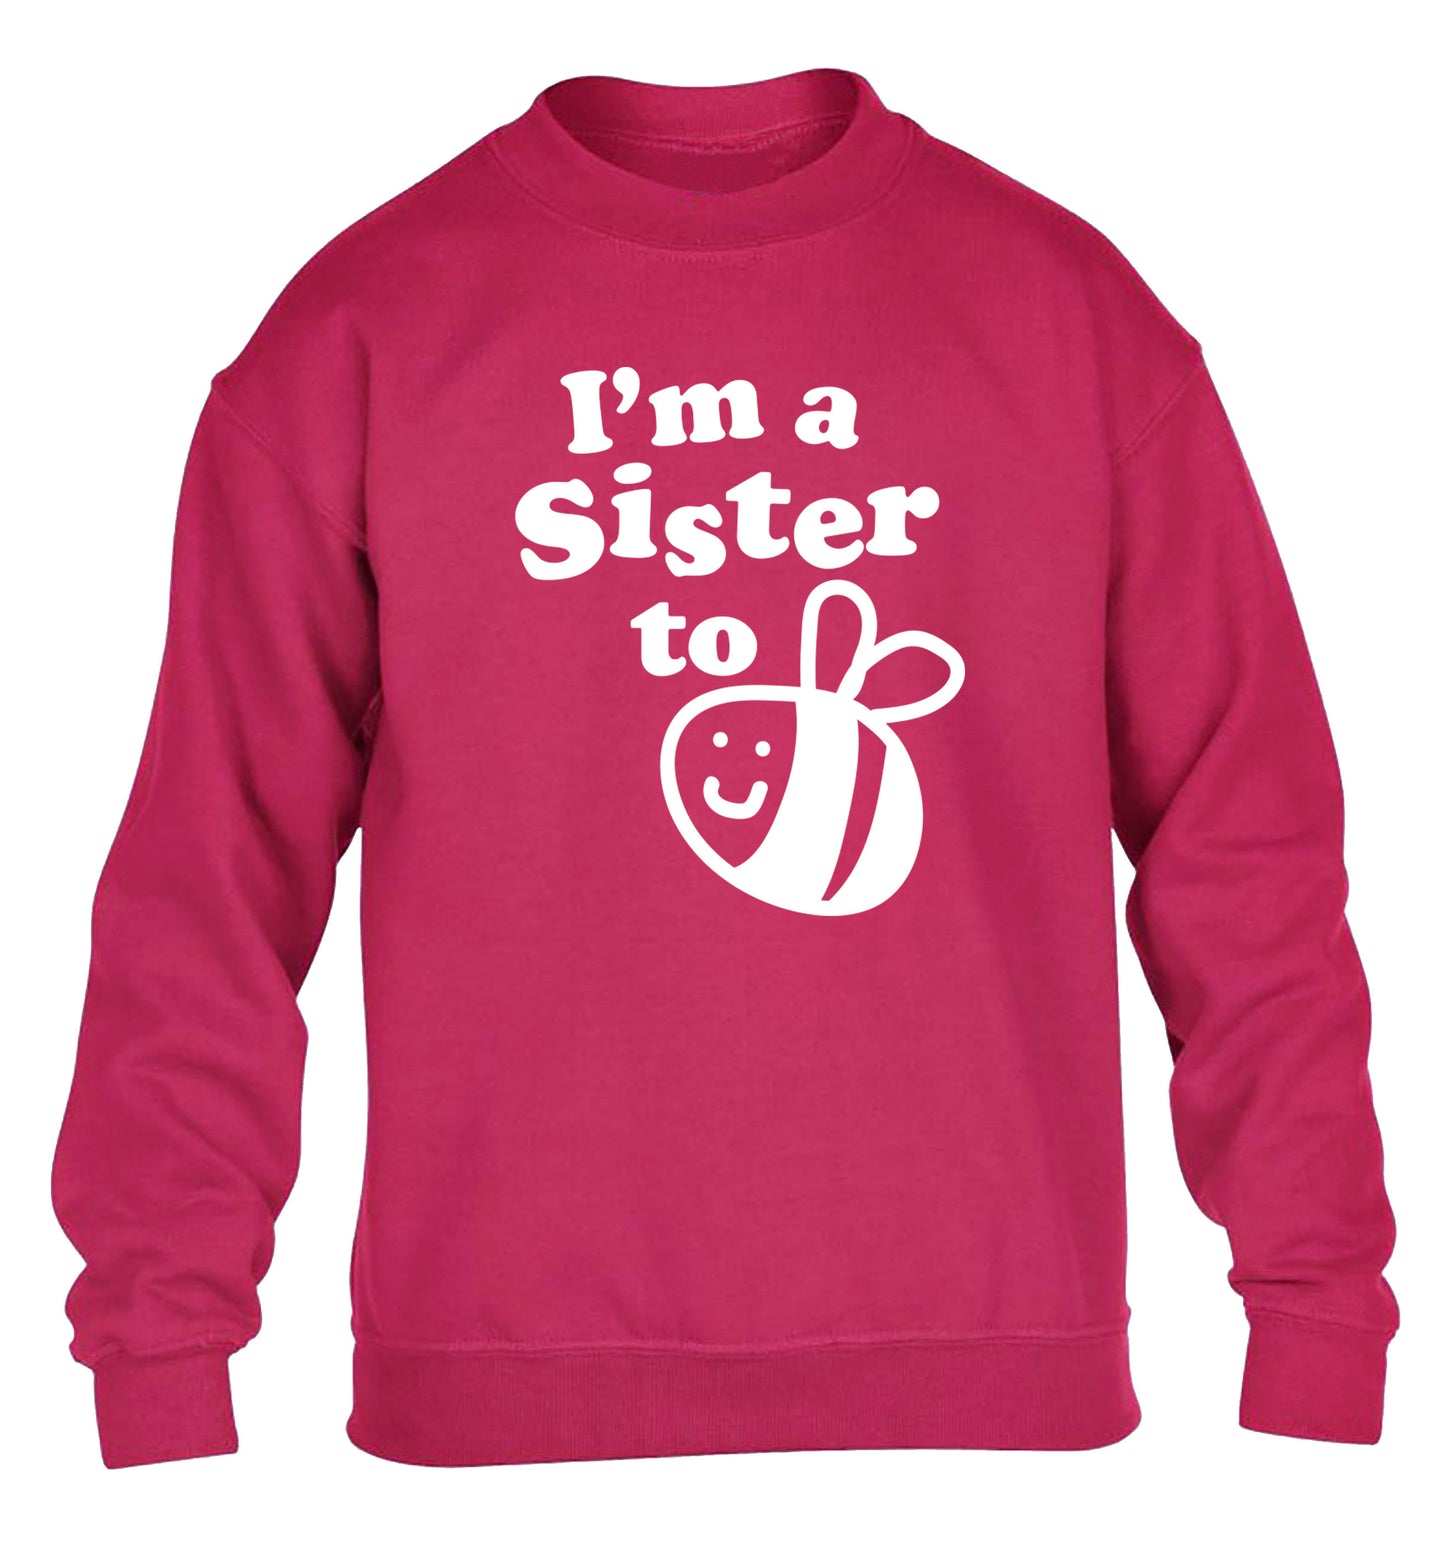 I'm a sister to be children's pink sweater 12-14 Years